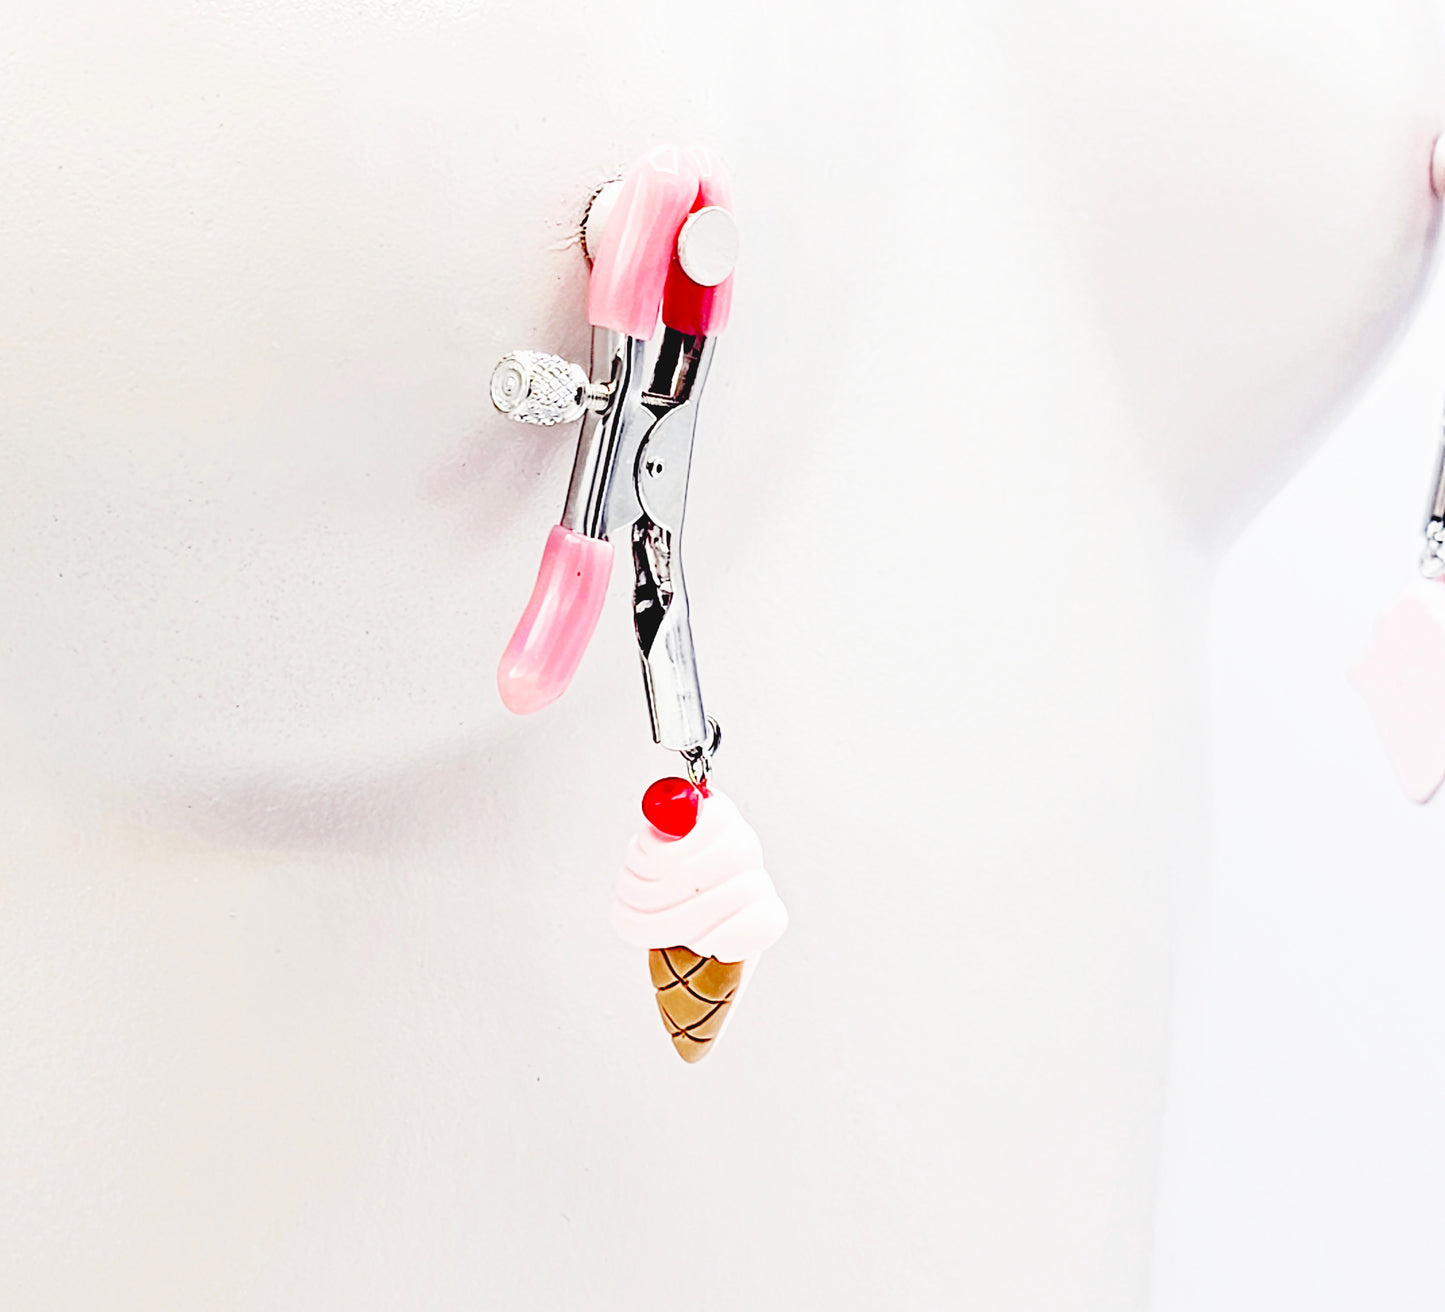 DDLG Nipple Clamps. Pink Ice Cream Cone Adjustable Clamps